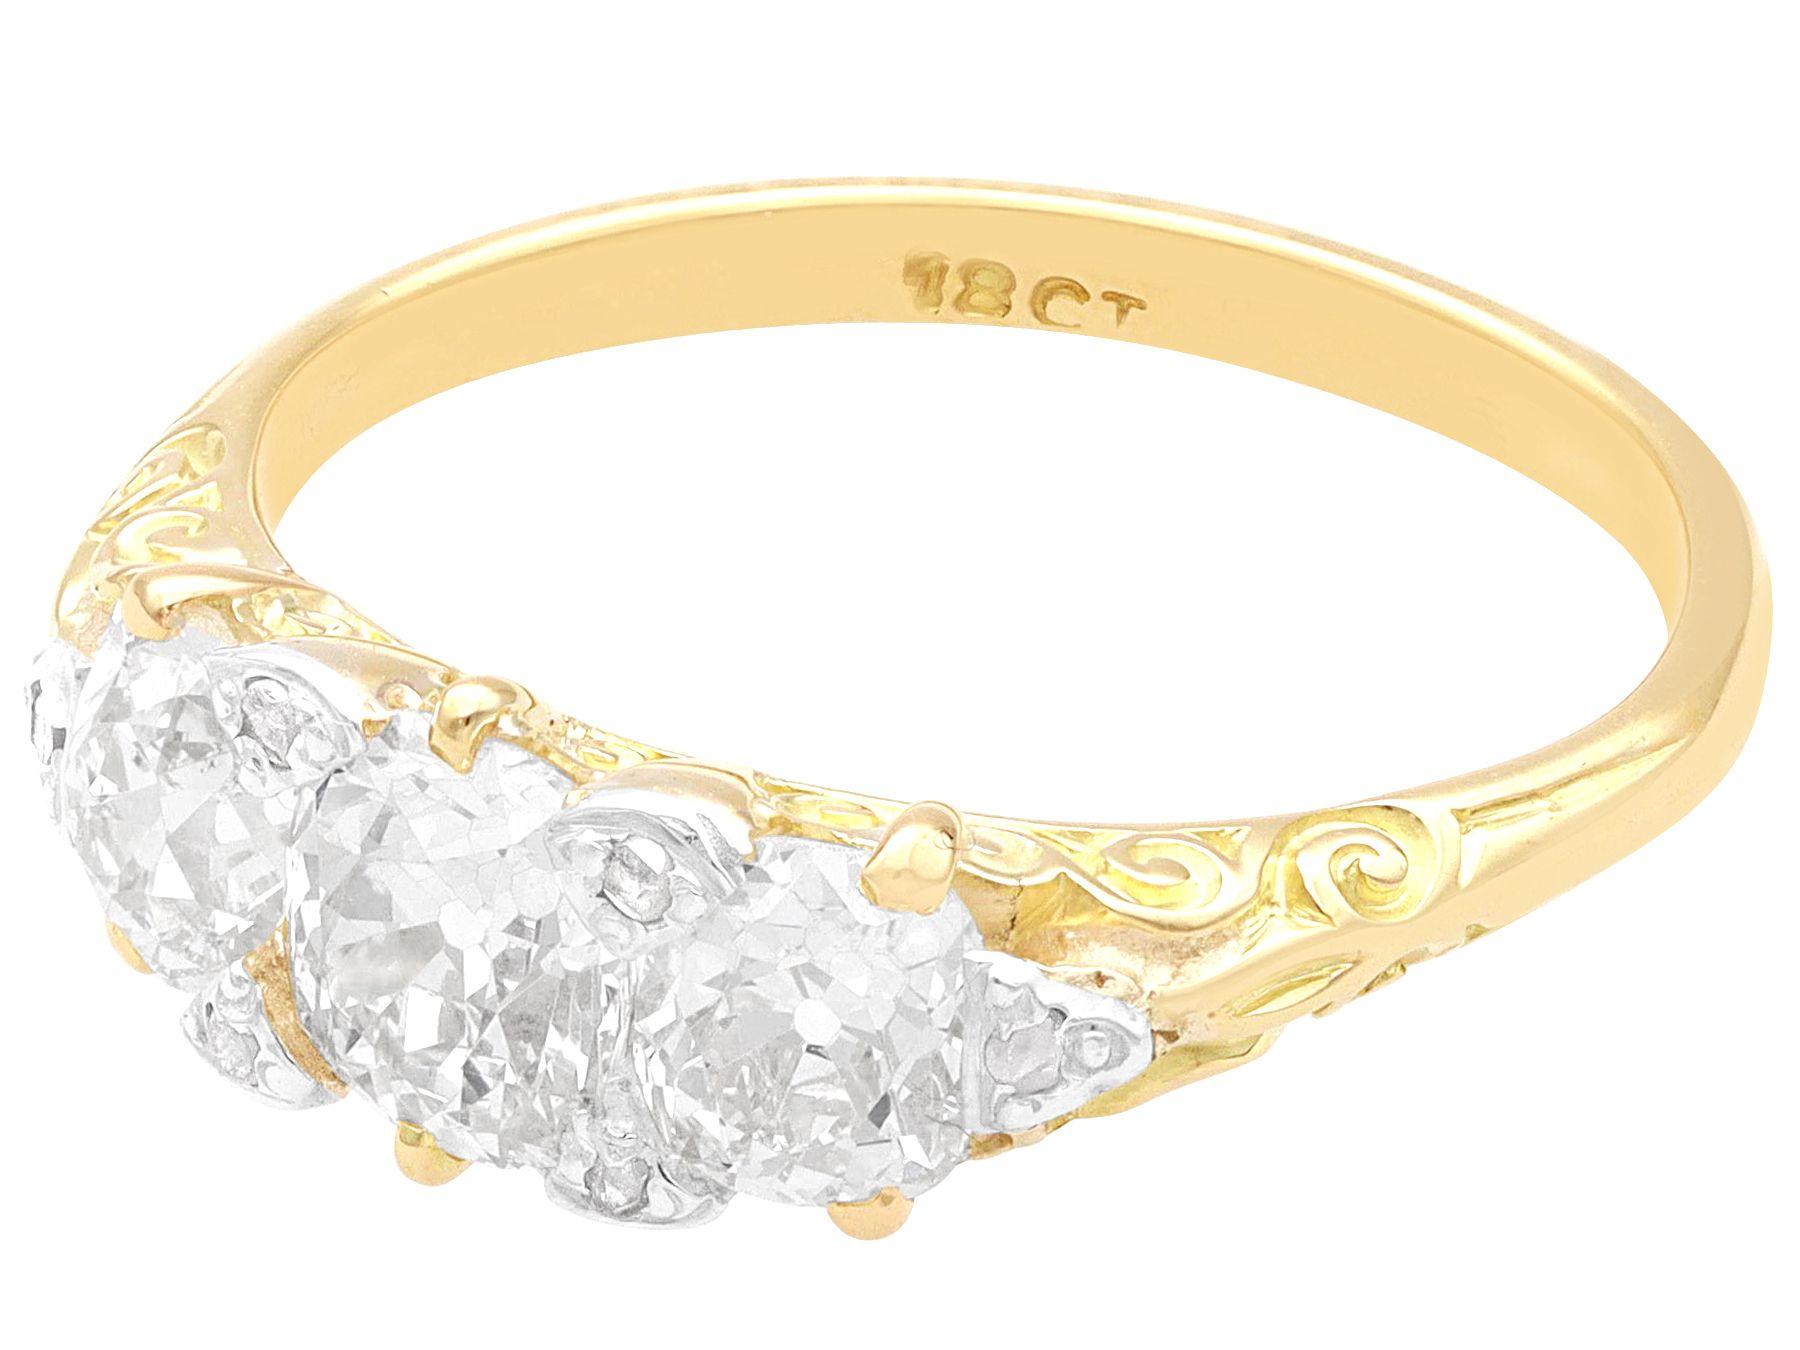 Round Cut Antique 2.23 Carat Diamond and 18k Yellow Gold Trilogy Ring, circa 1900 For Sale